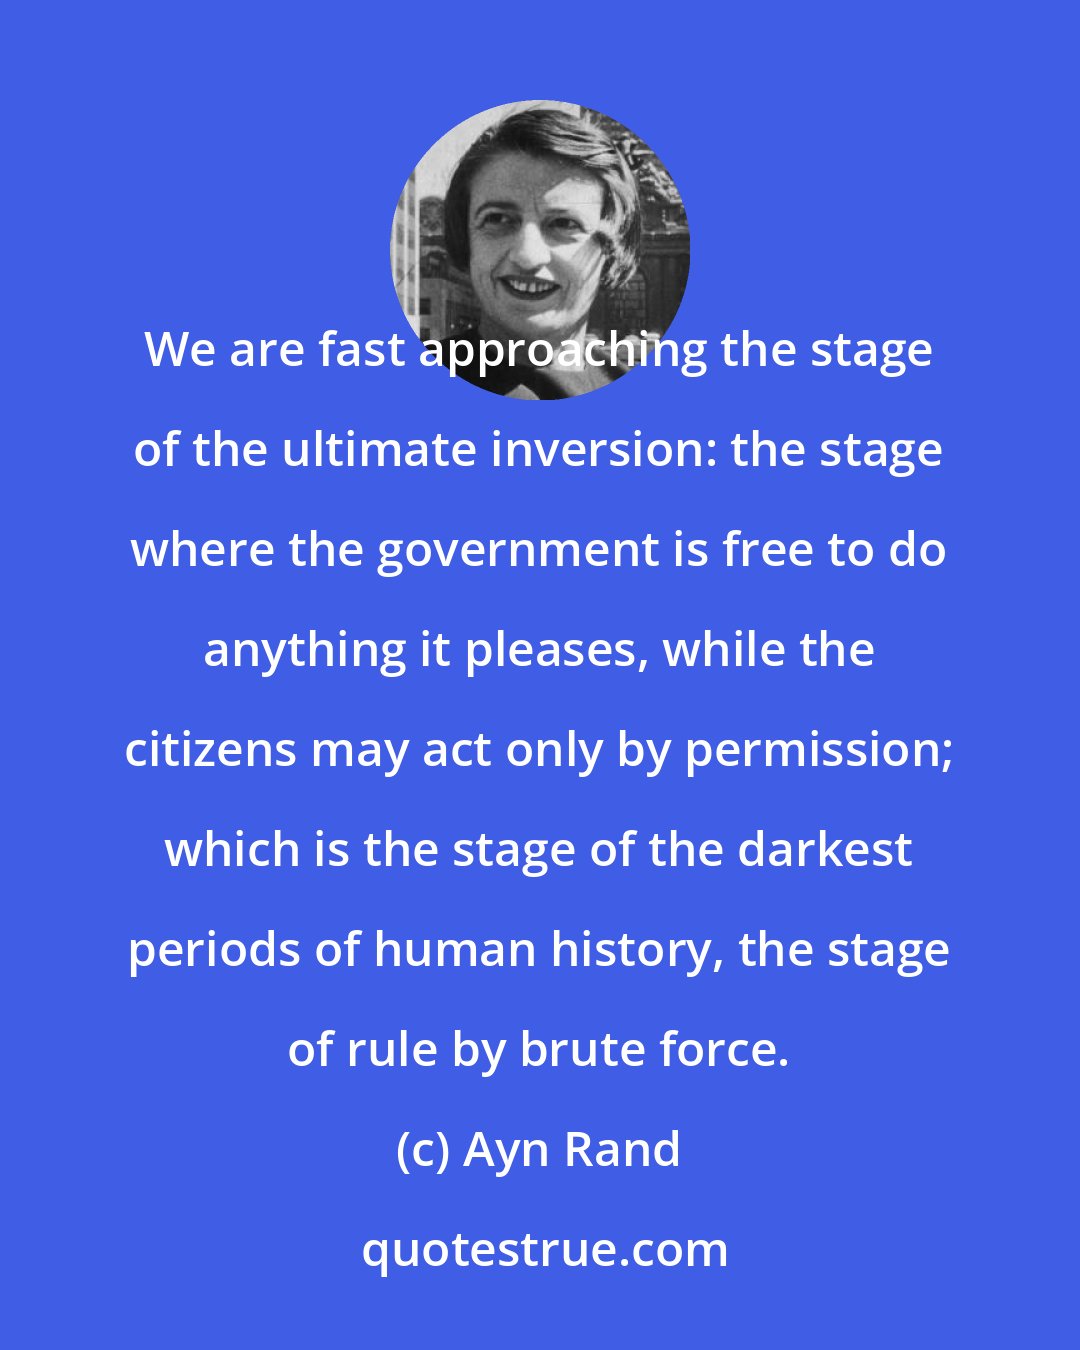 Ayn Rand: We are fast approaching the stage of the ultimate inversion: the stage where the government is free to do anything it pleases, while the citizens may act only by permission; which is the stage of the darkest periods of human history, the stage of rule by brute force.